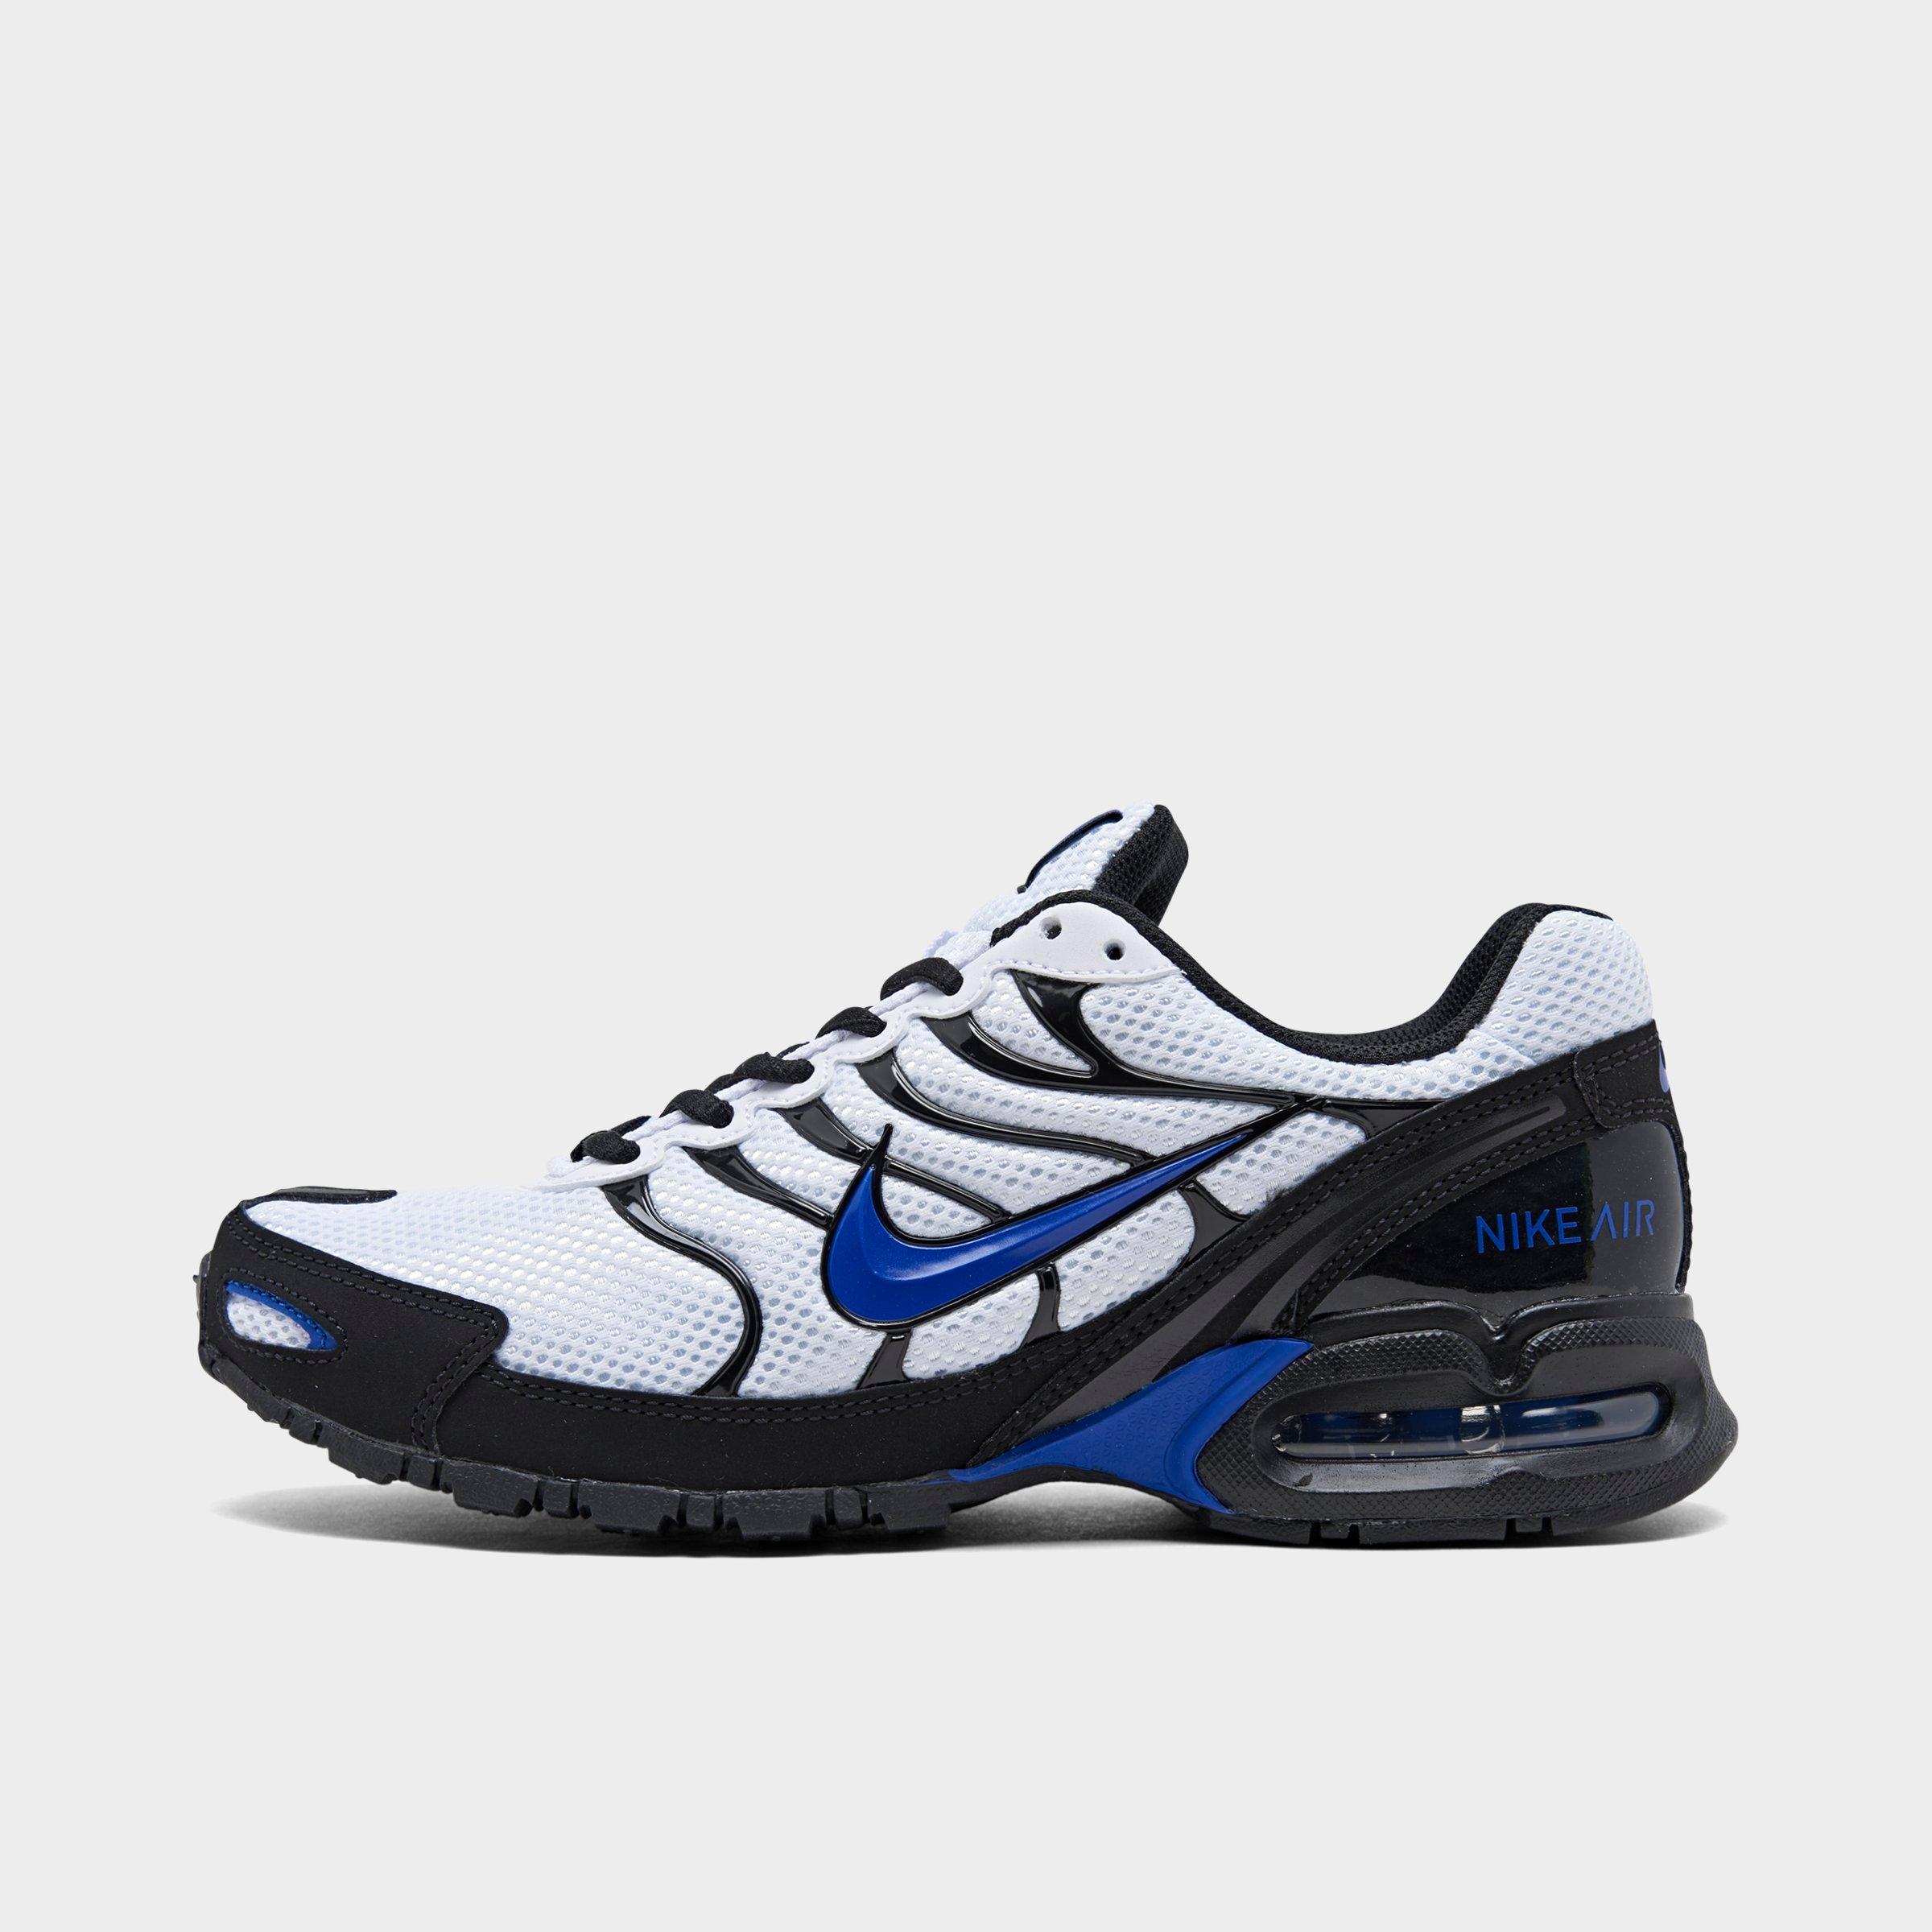 Men's Nike Air Max Torch 4 Running Shoes| Finish Line